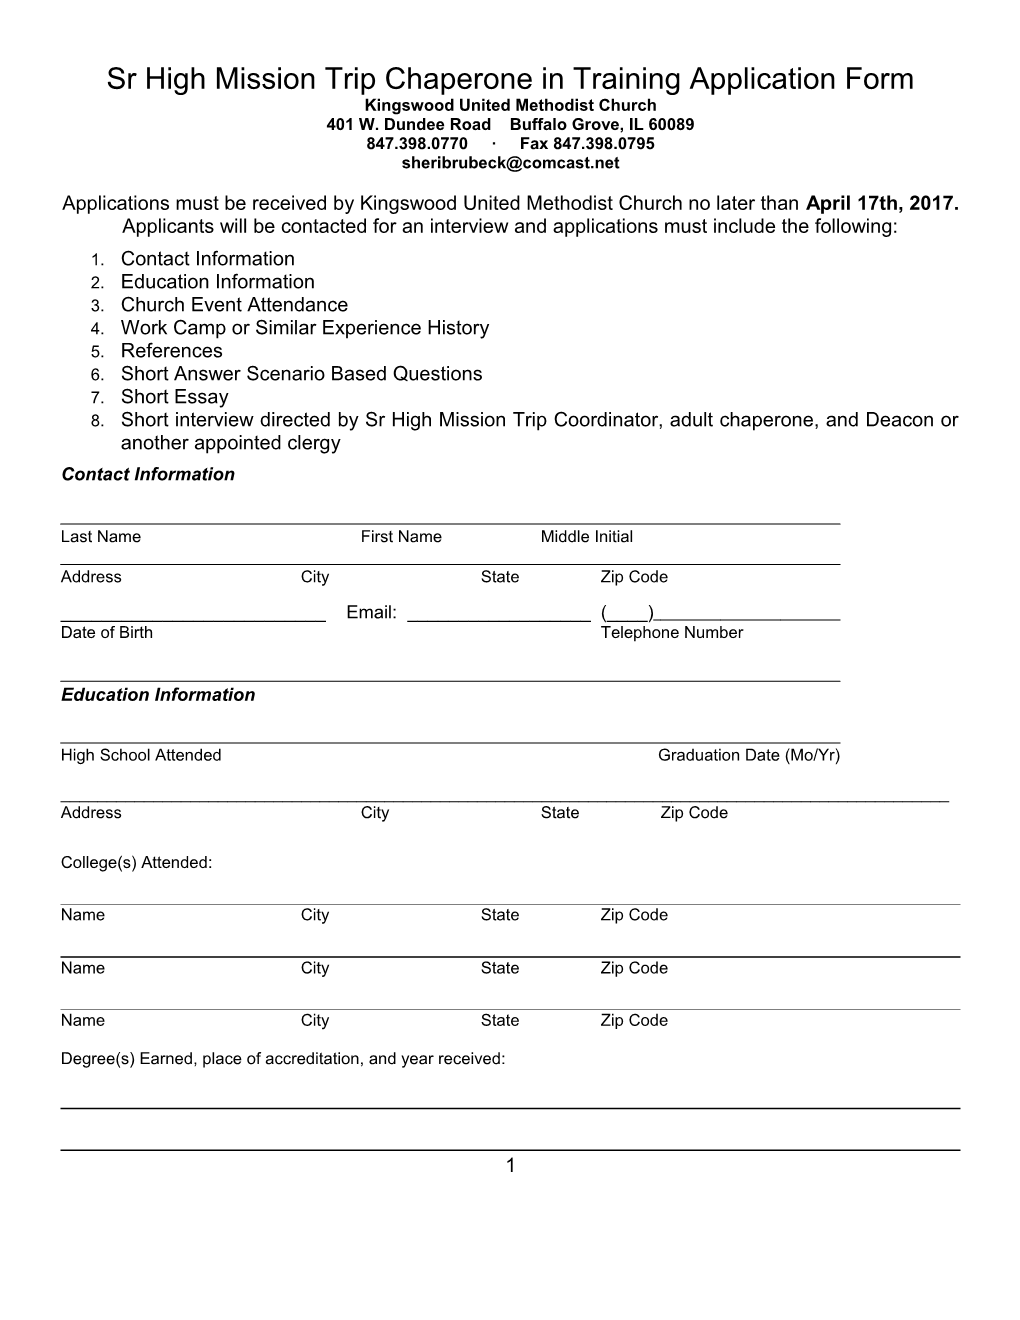 Sr High Mission Trip Chaperone in Training Application Form